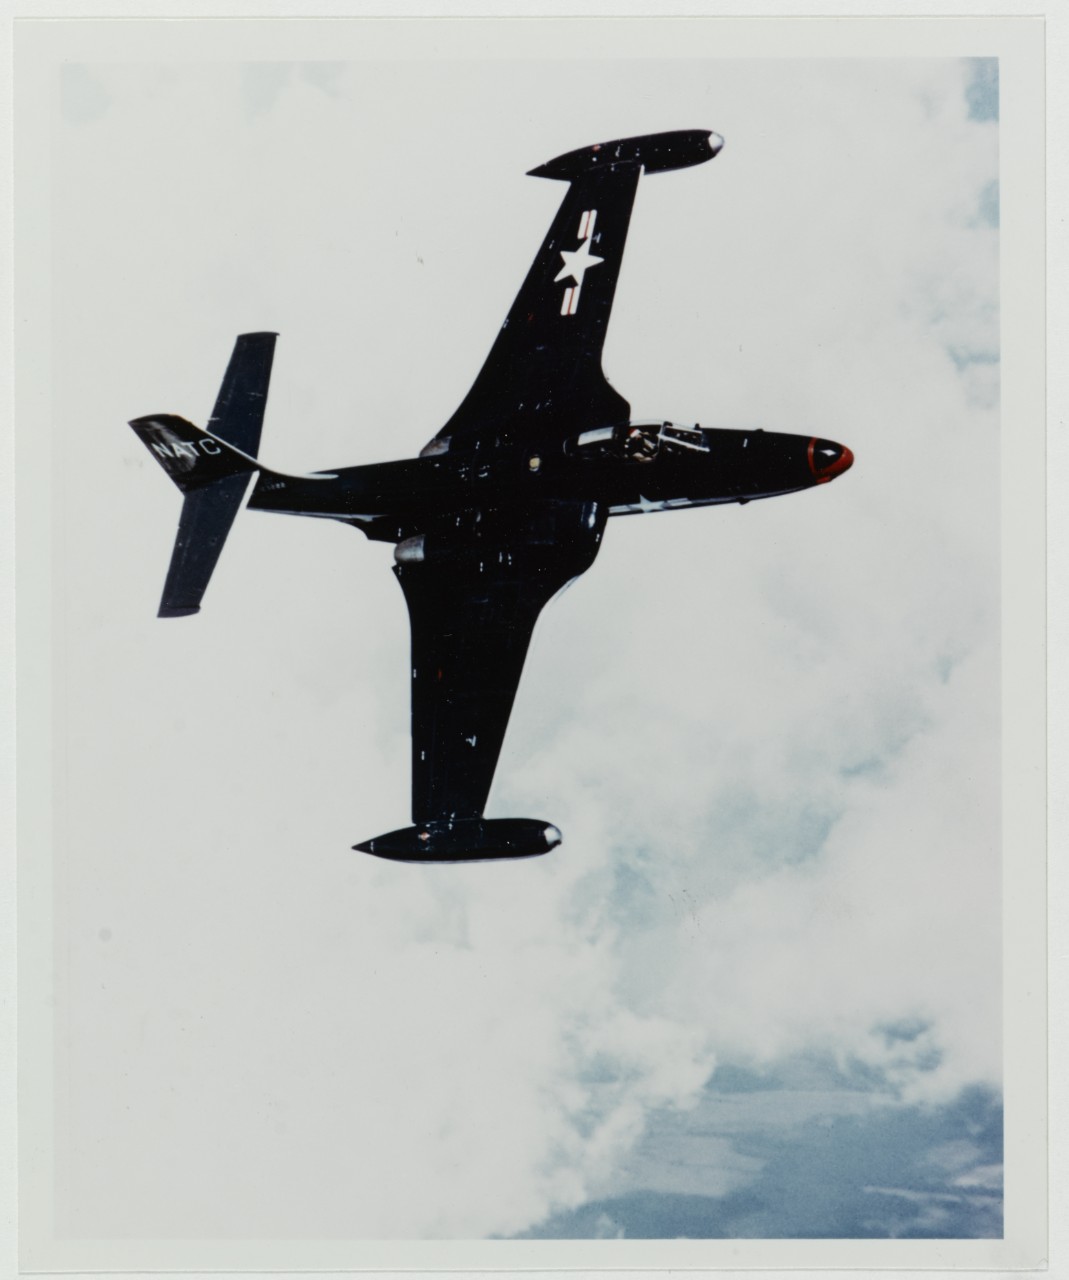 McDonnell F2H-2 "BANSHEE" in flight over Patuxent River, Maryland, circa 1950s